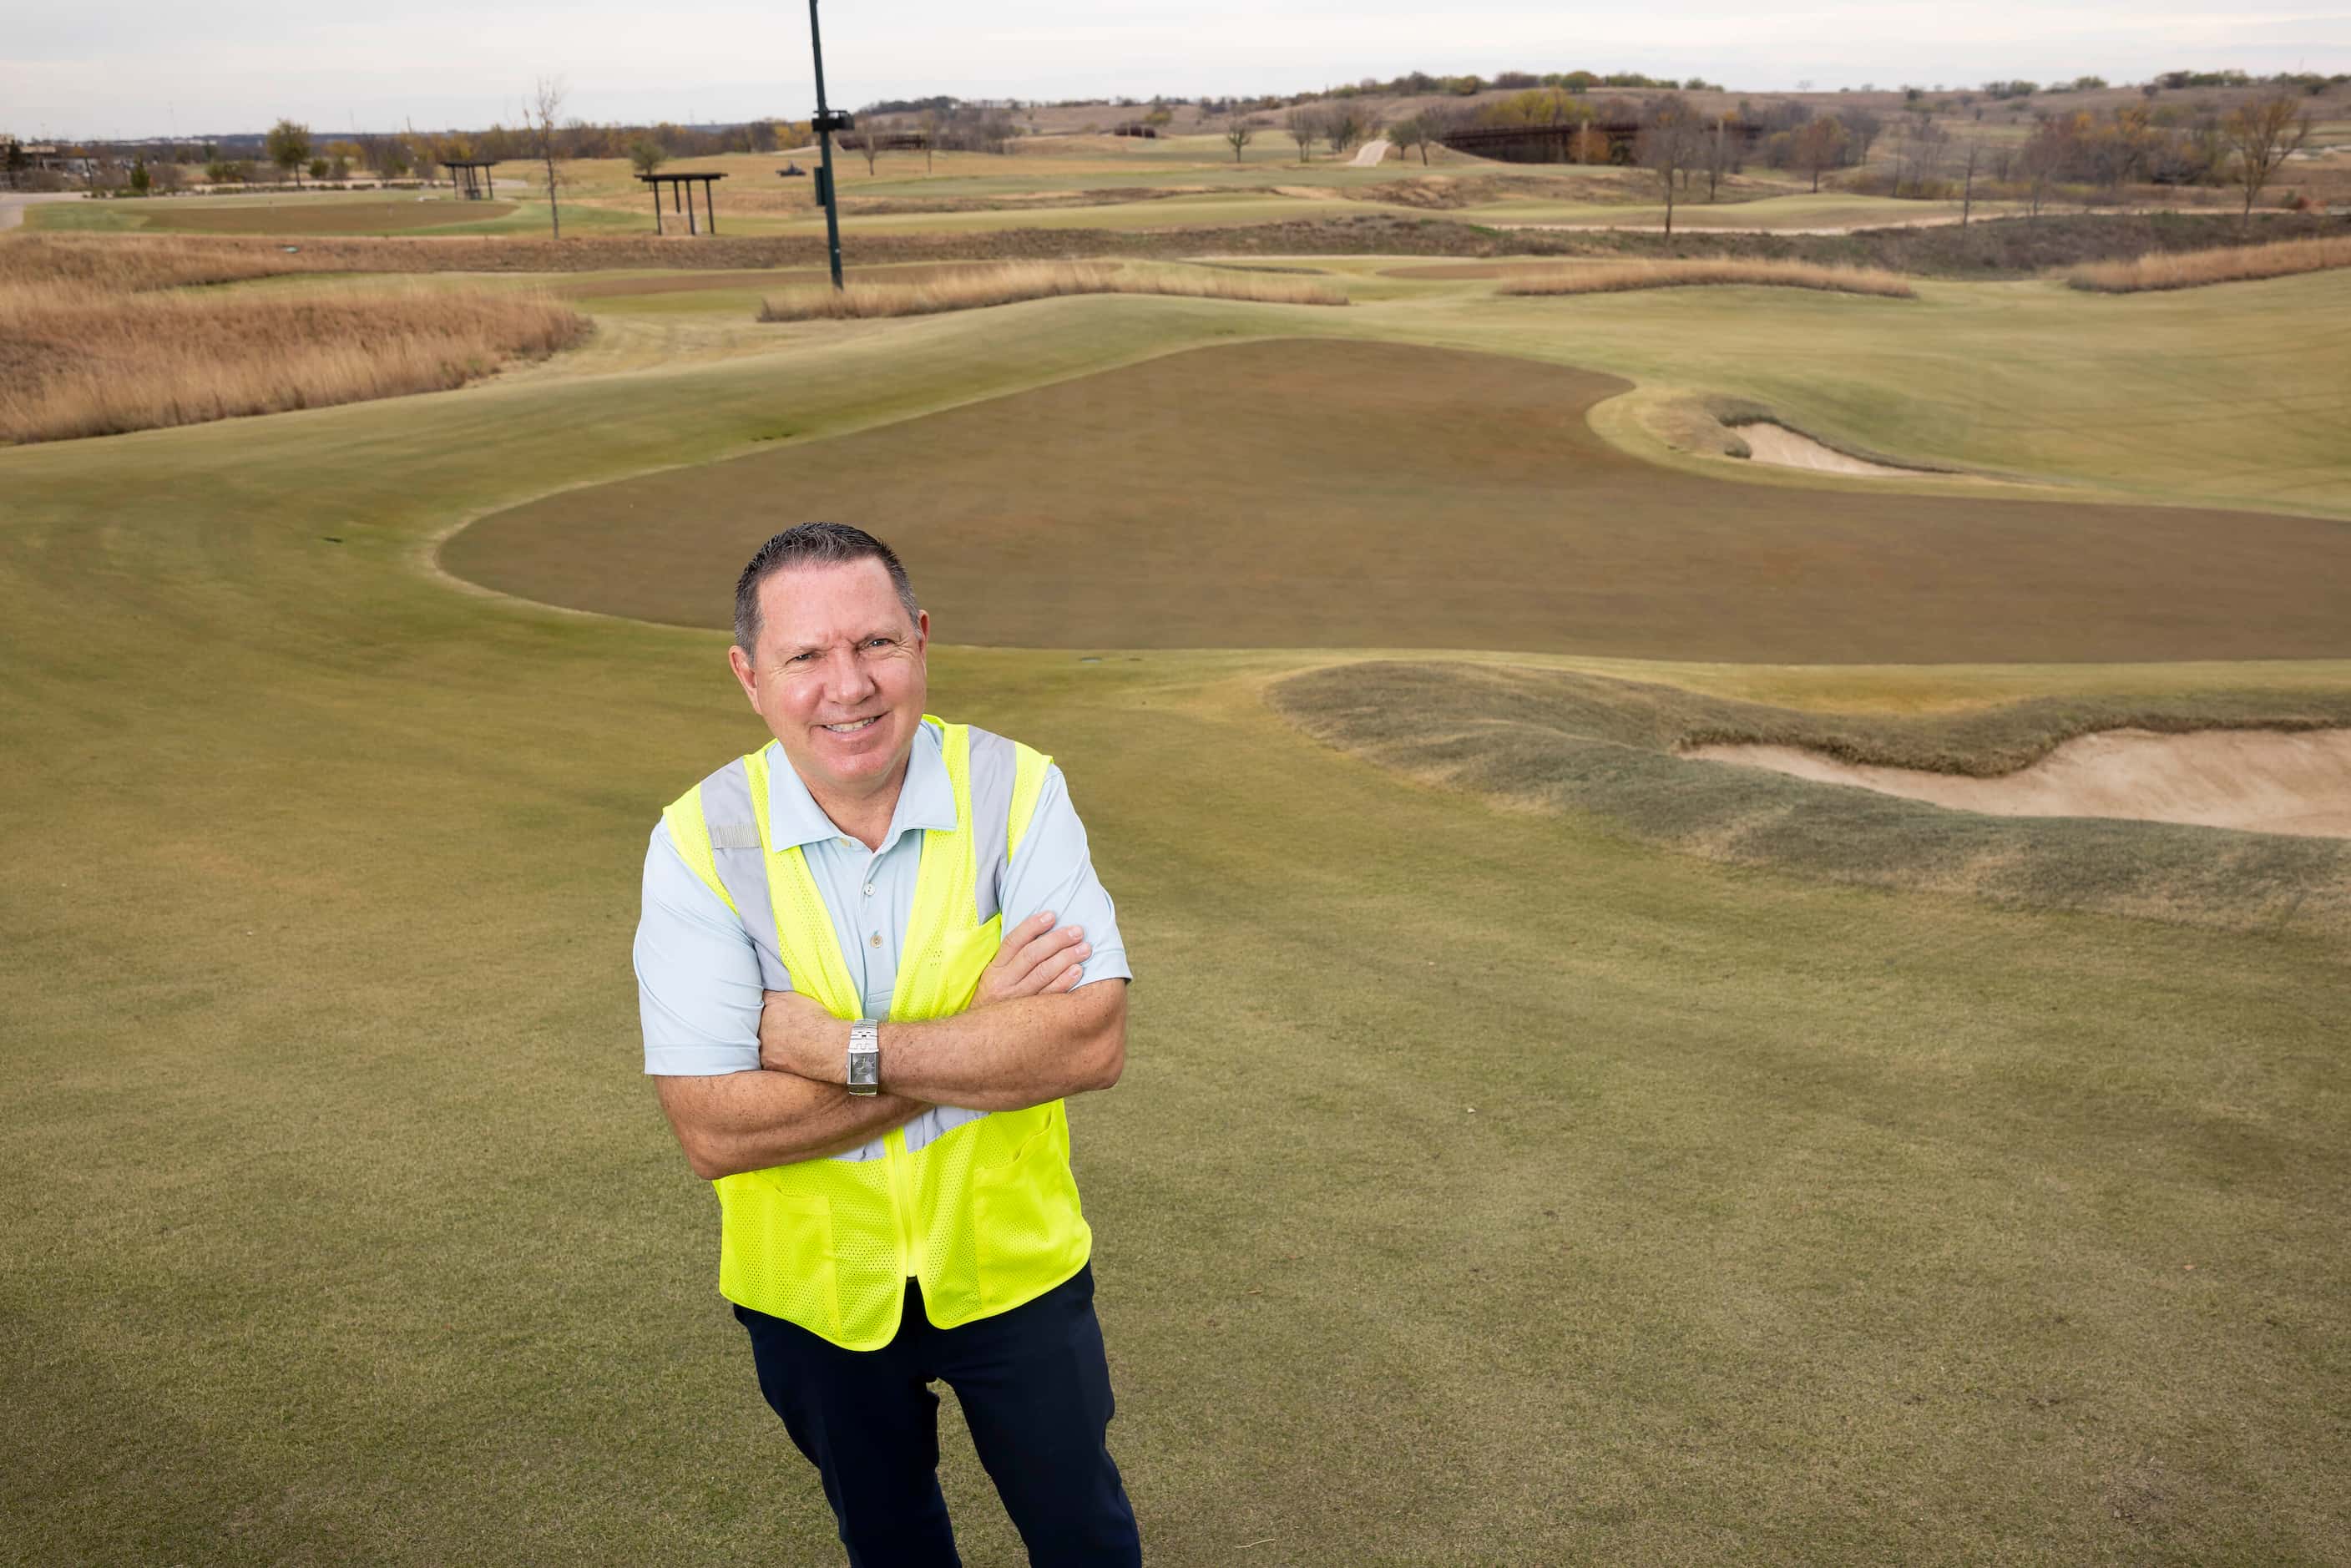 Jeff Smith, vice president and managing director of the Omni PGA Frisco Resort.